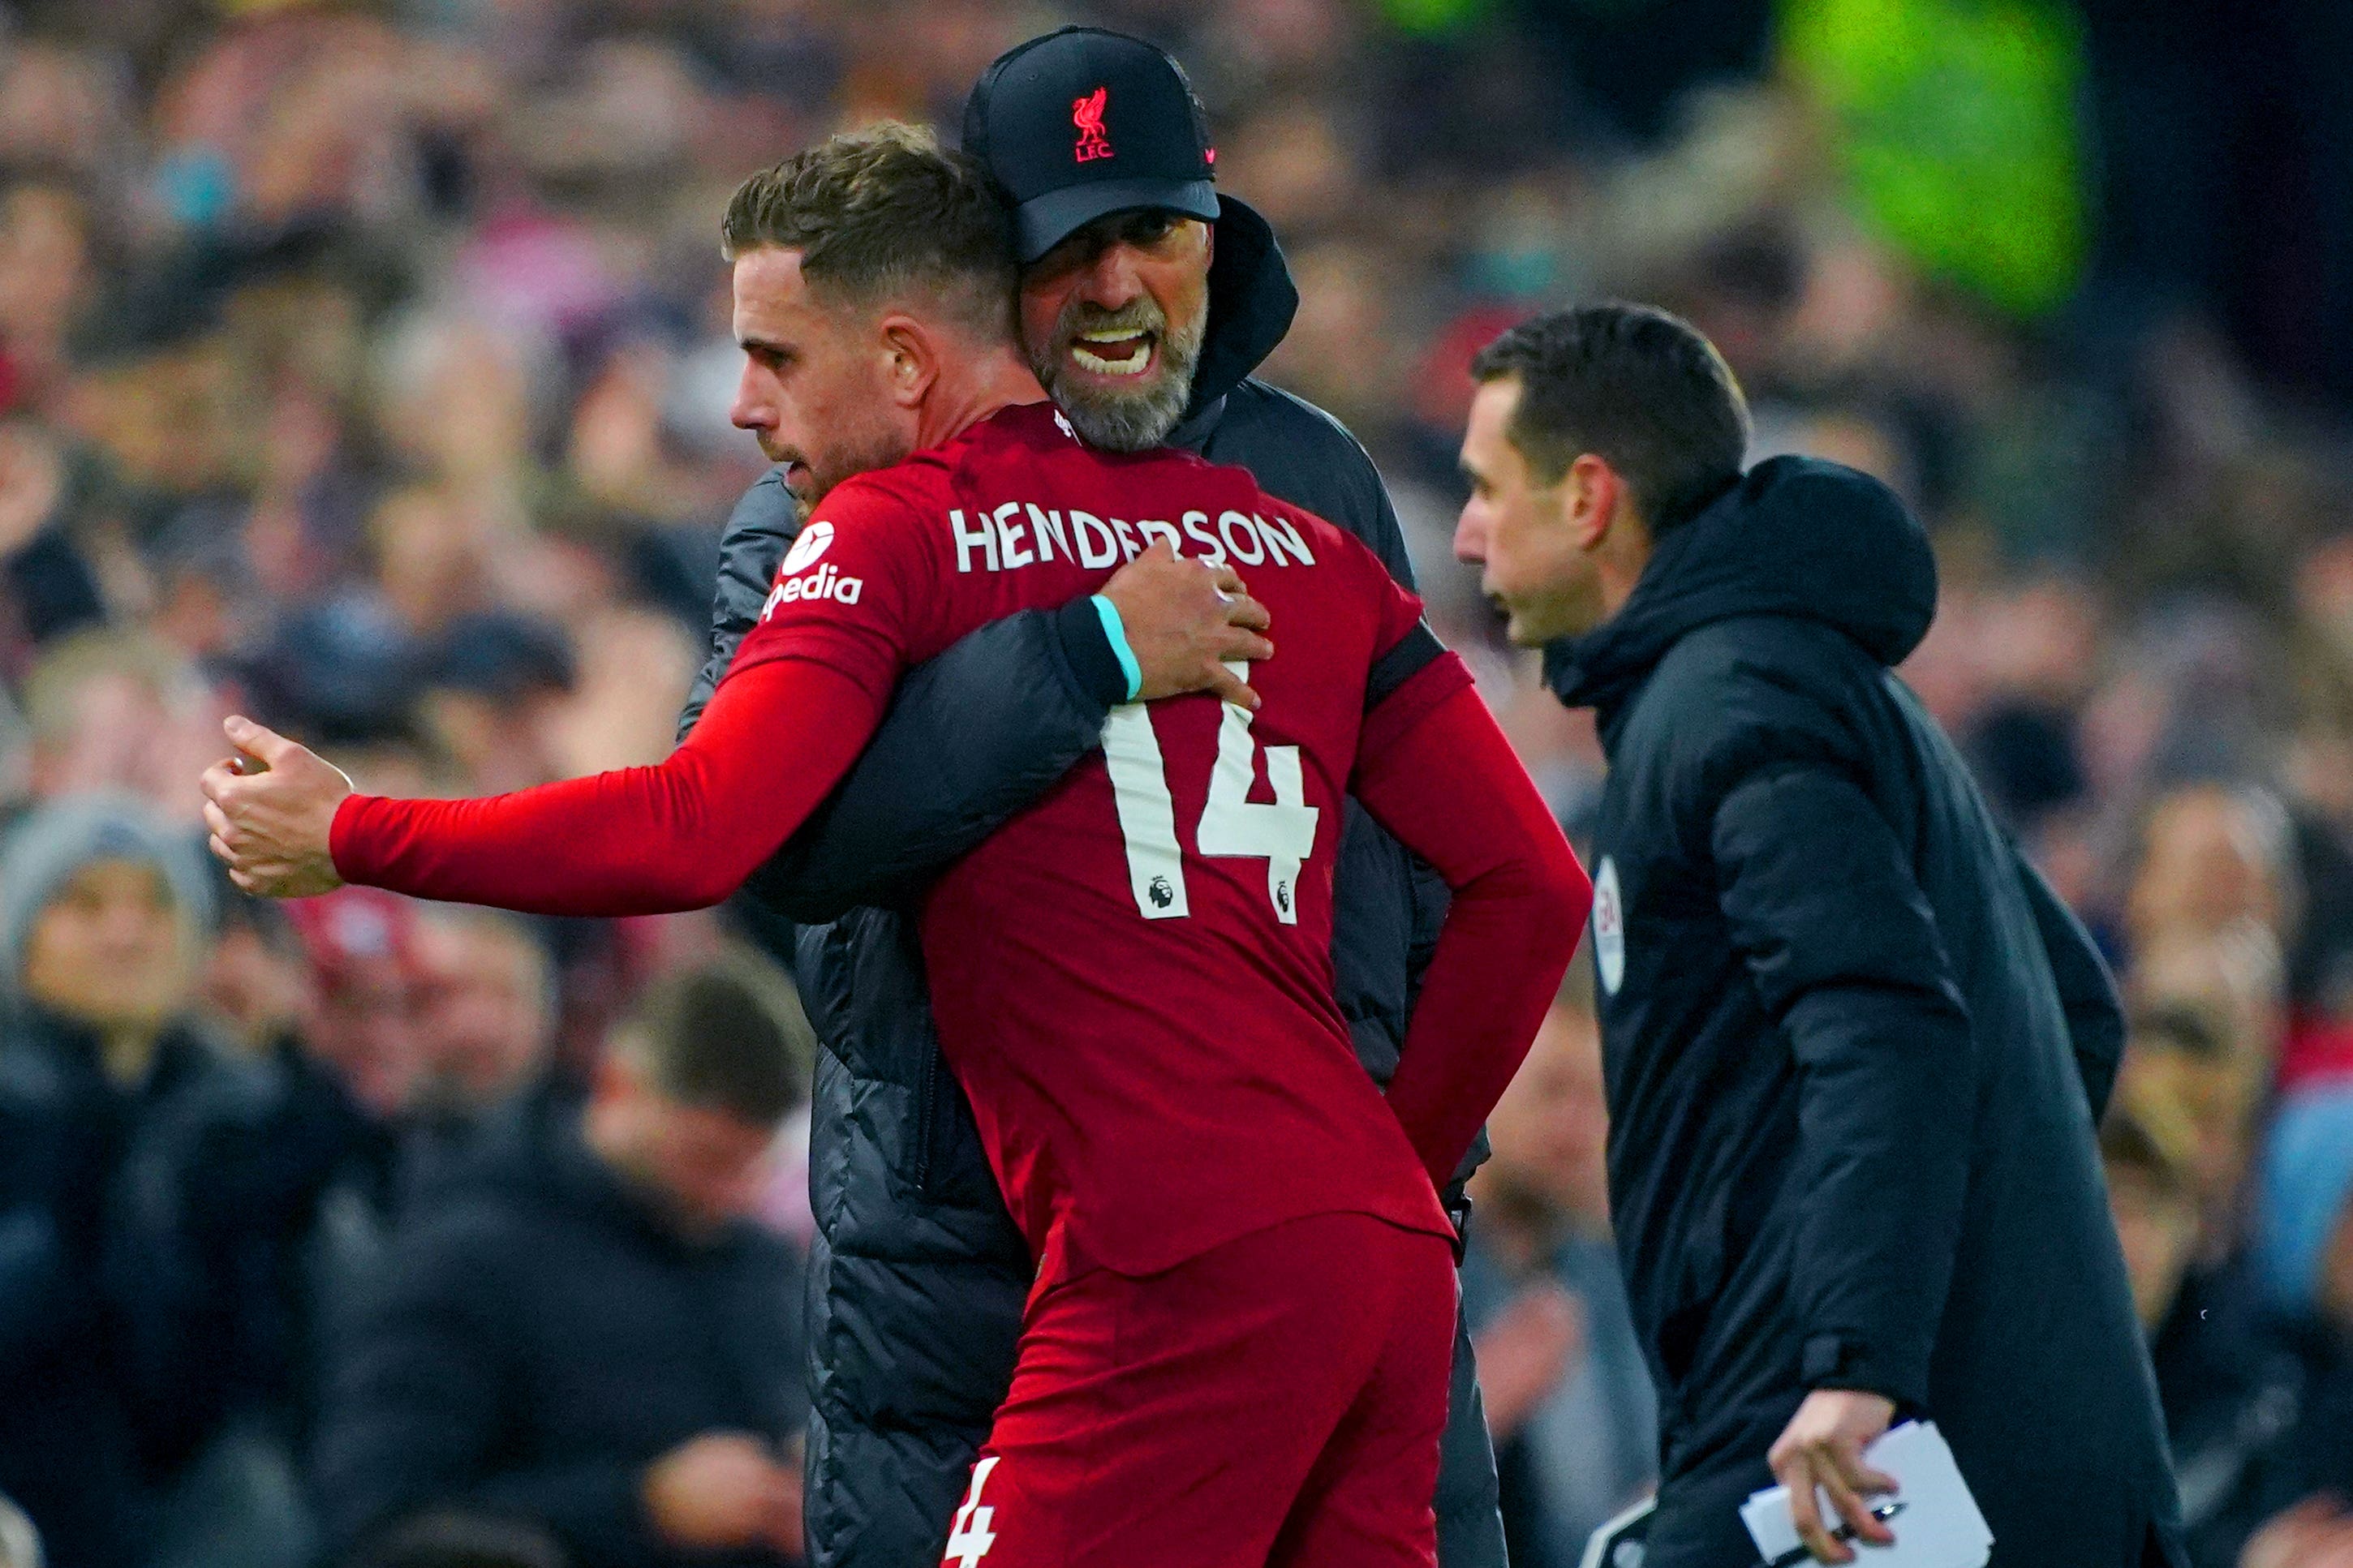 Jordan Henderson is hugged by manager Jurgen Klopp after being substituted during last year’s Merseyside derby at Anfield (Peter Byrne/PA).